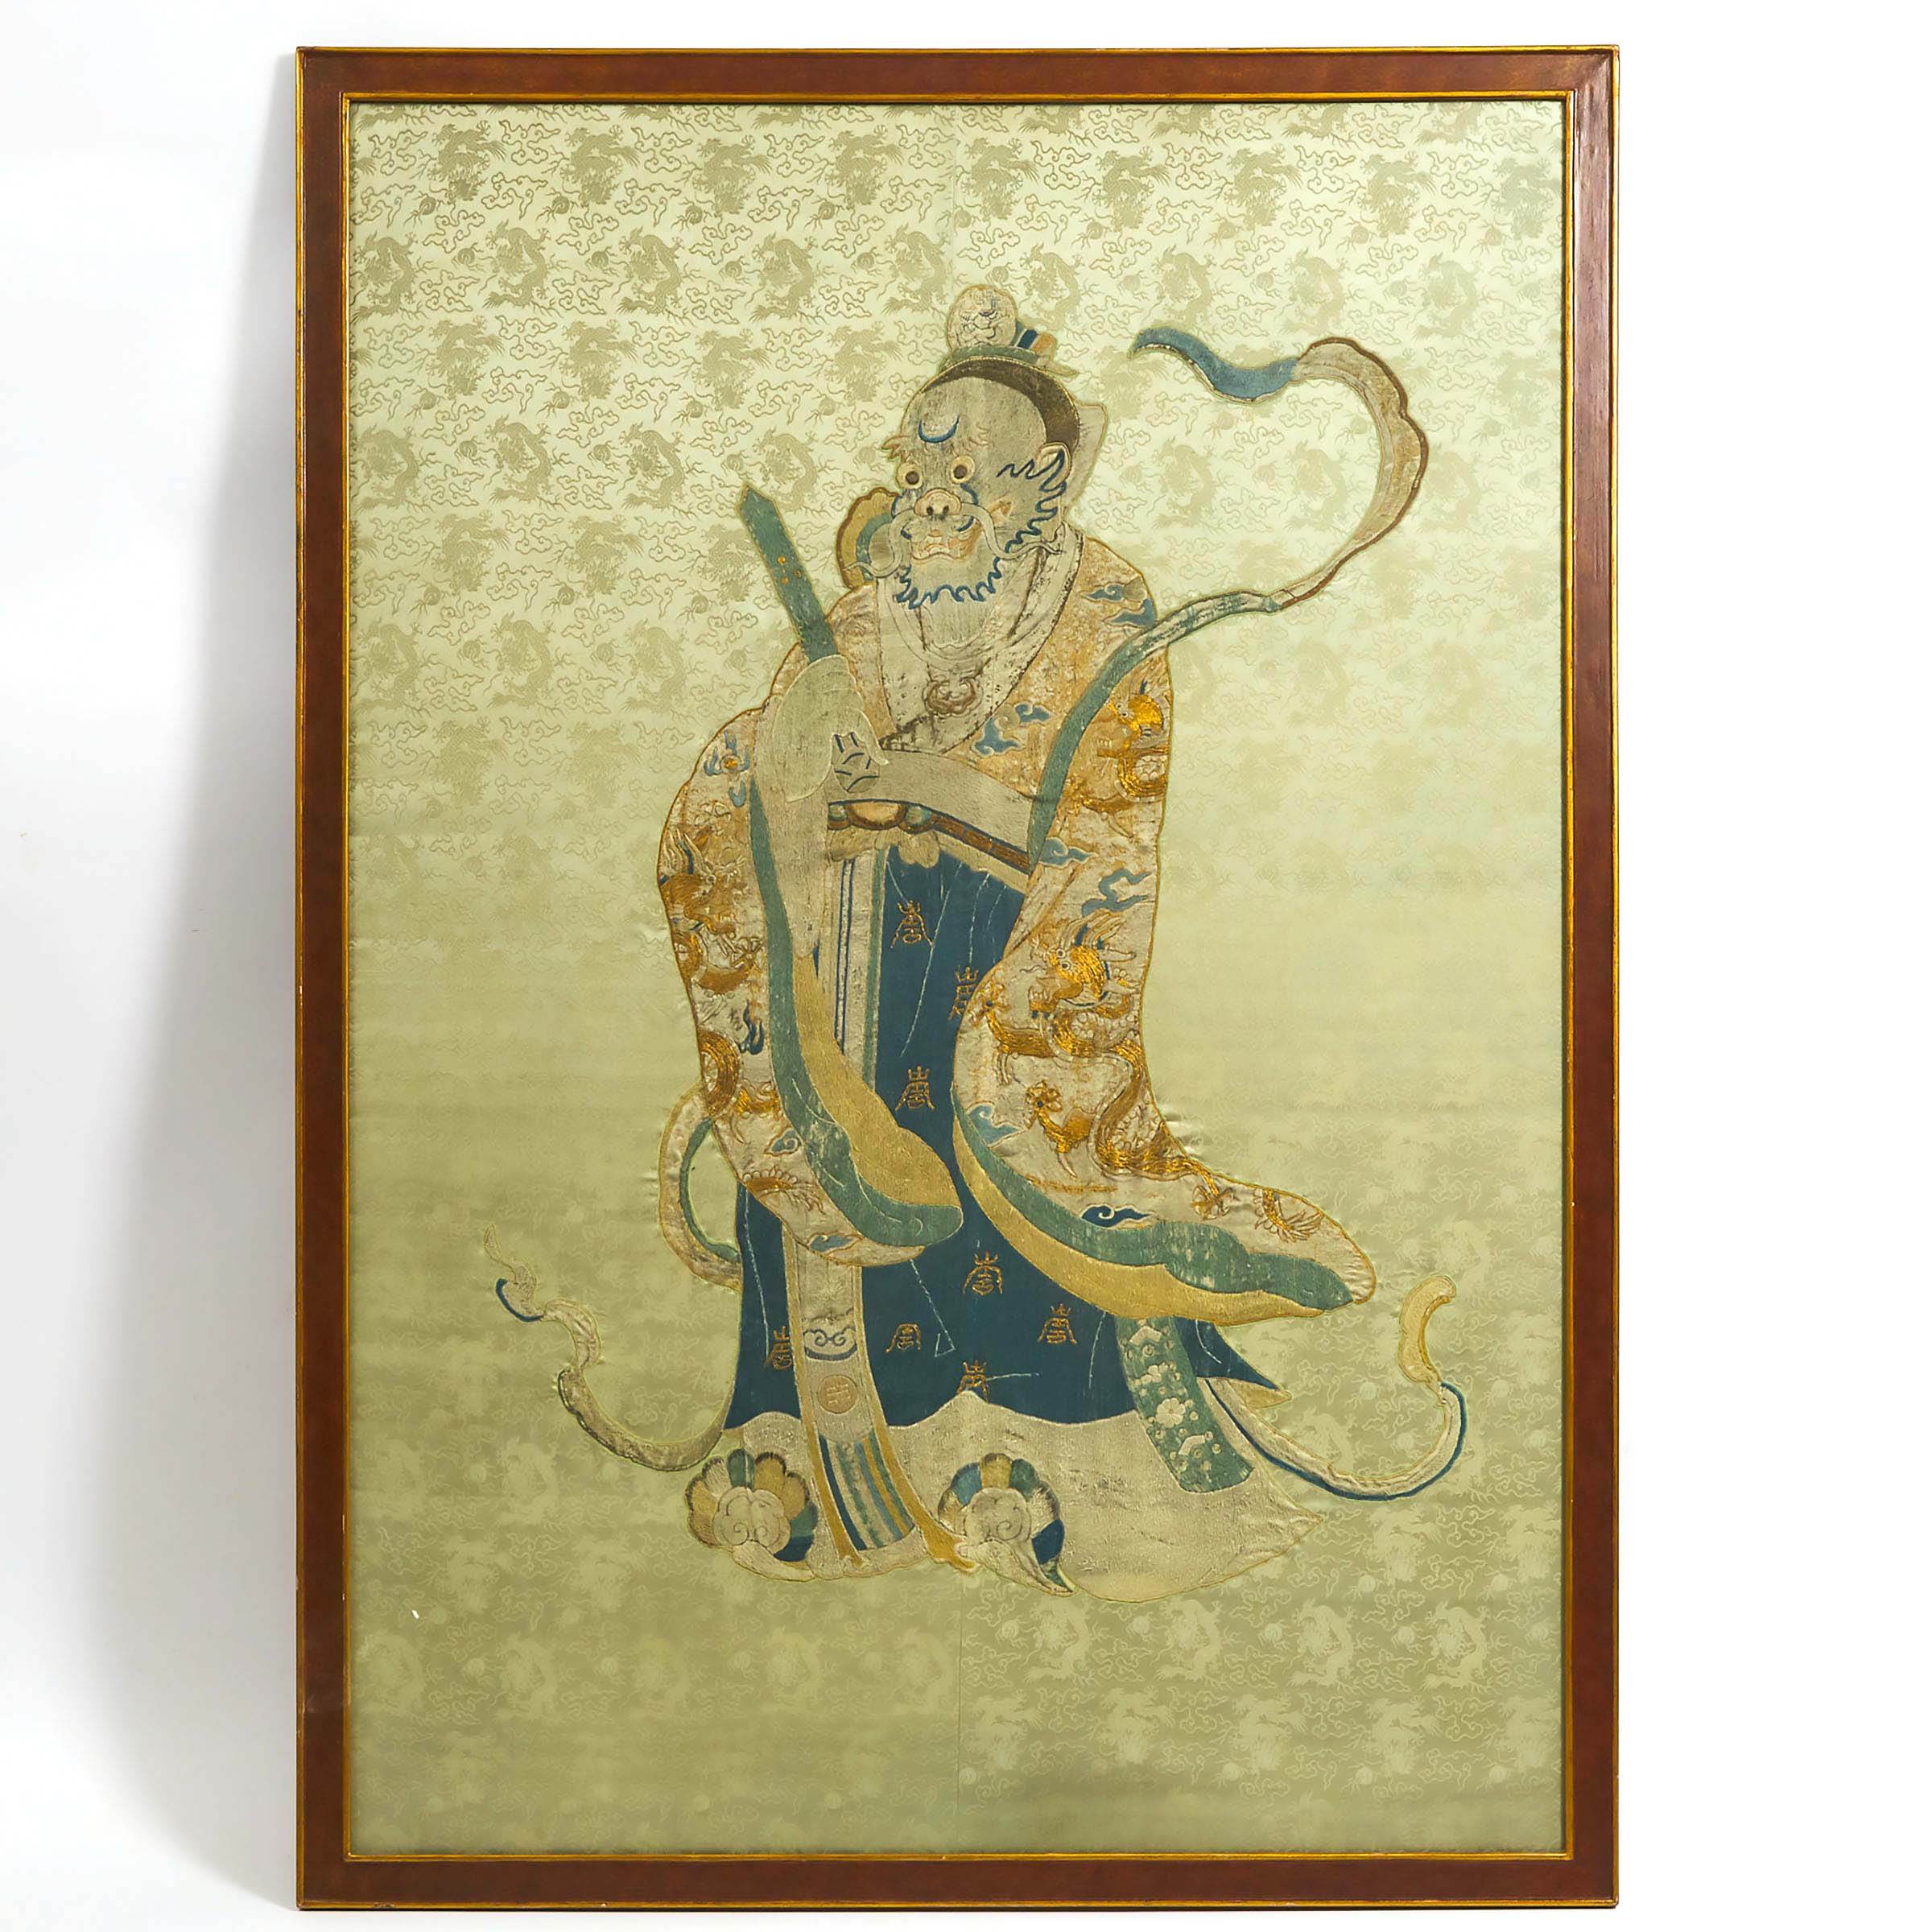 A Large Embroidered Silk Panel of the Dragon King, 18th/19th Century